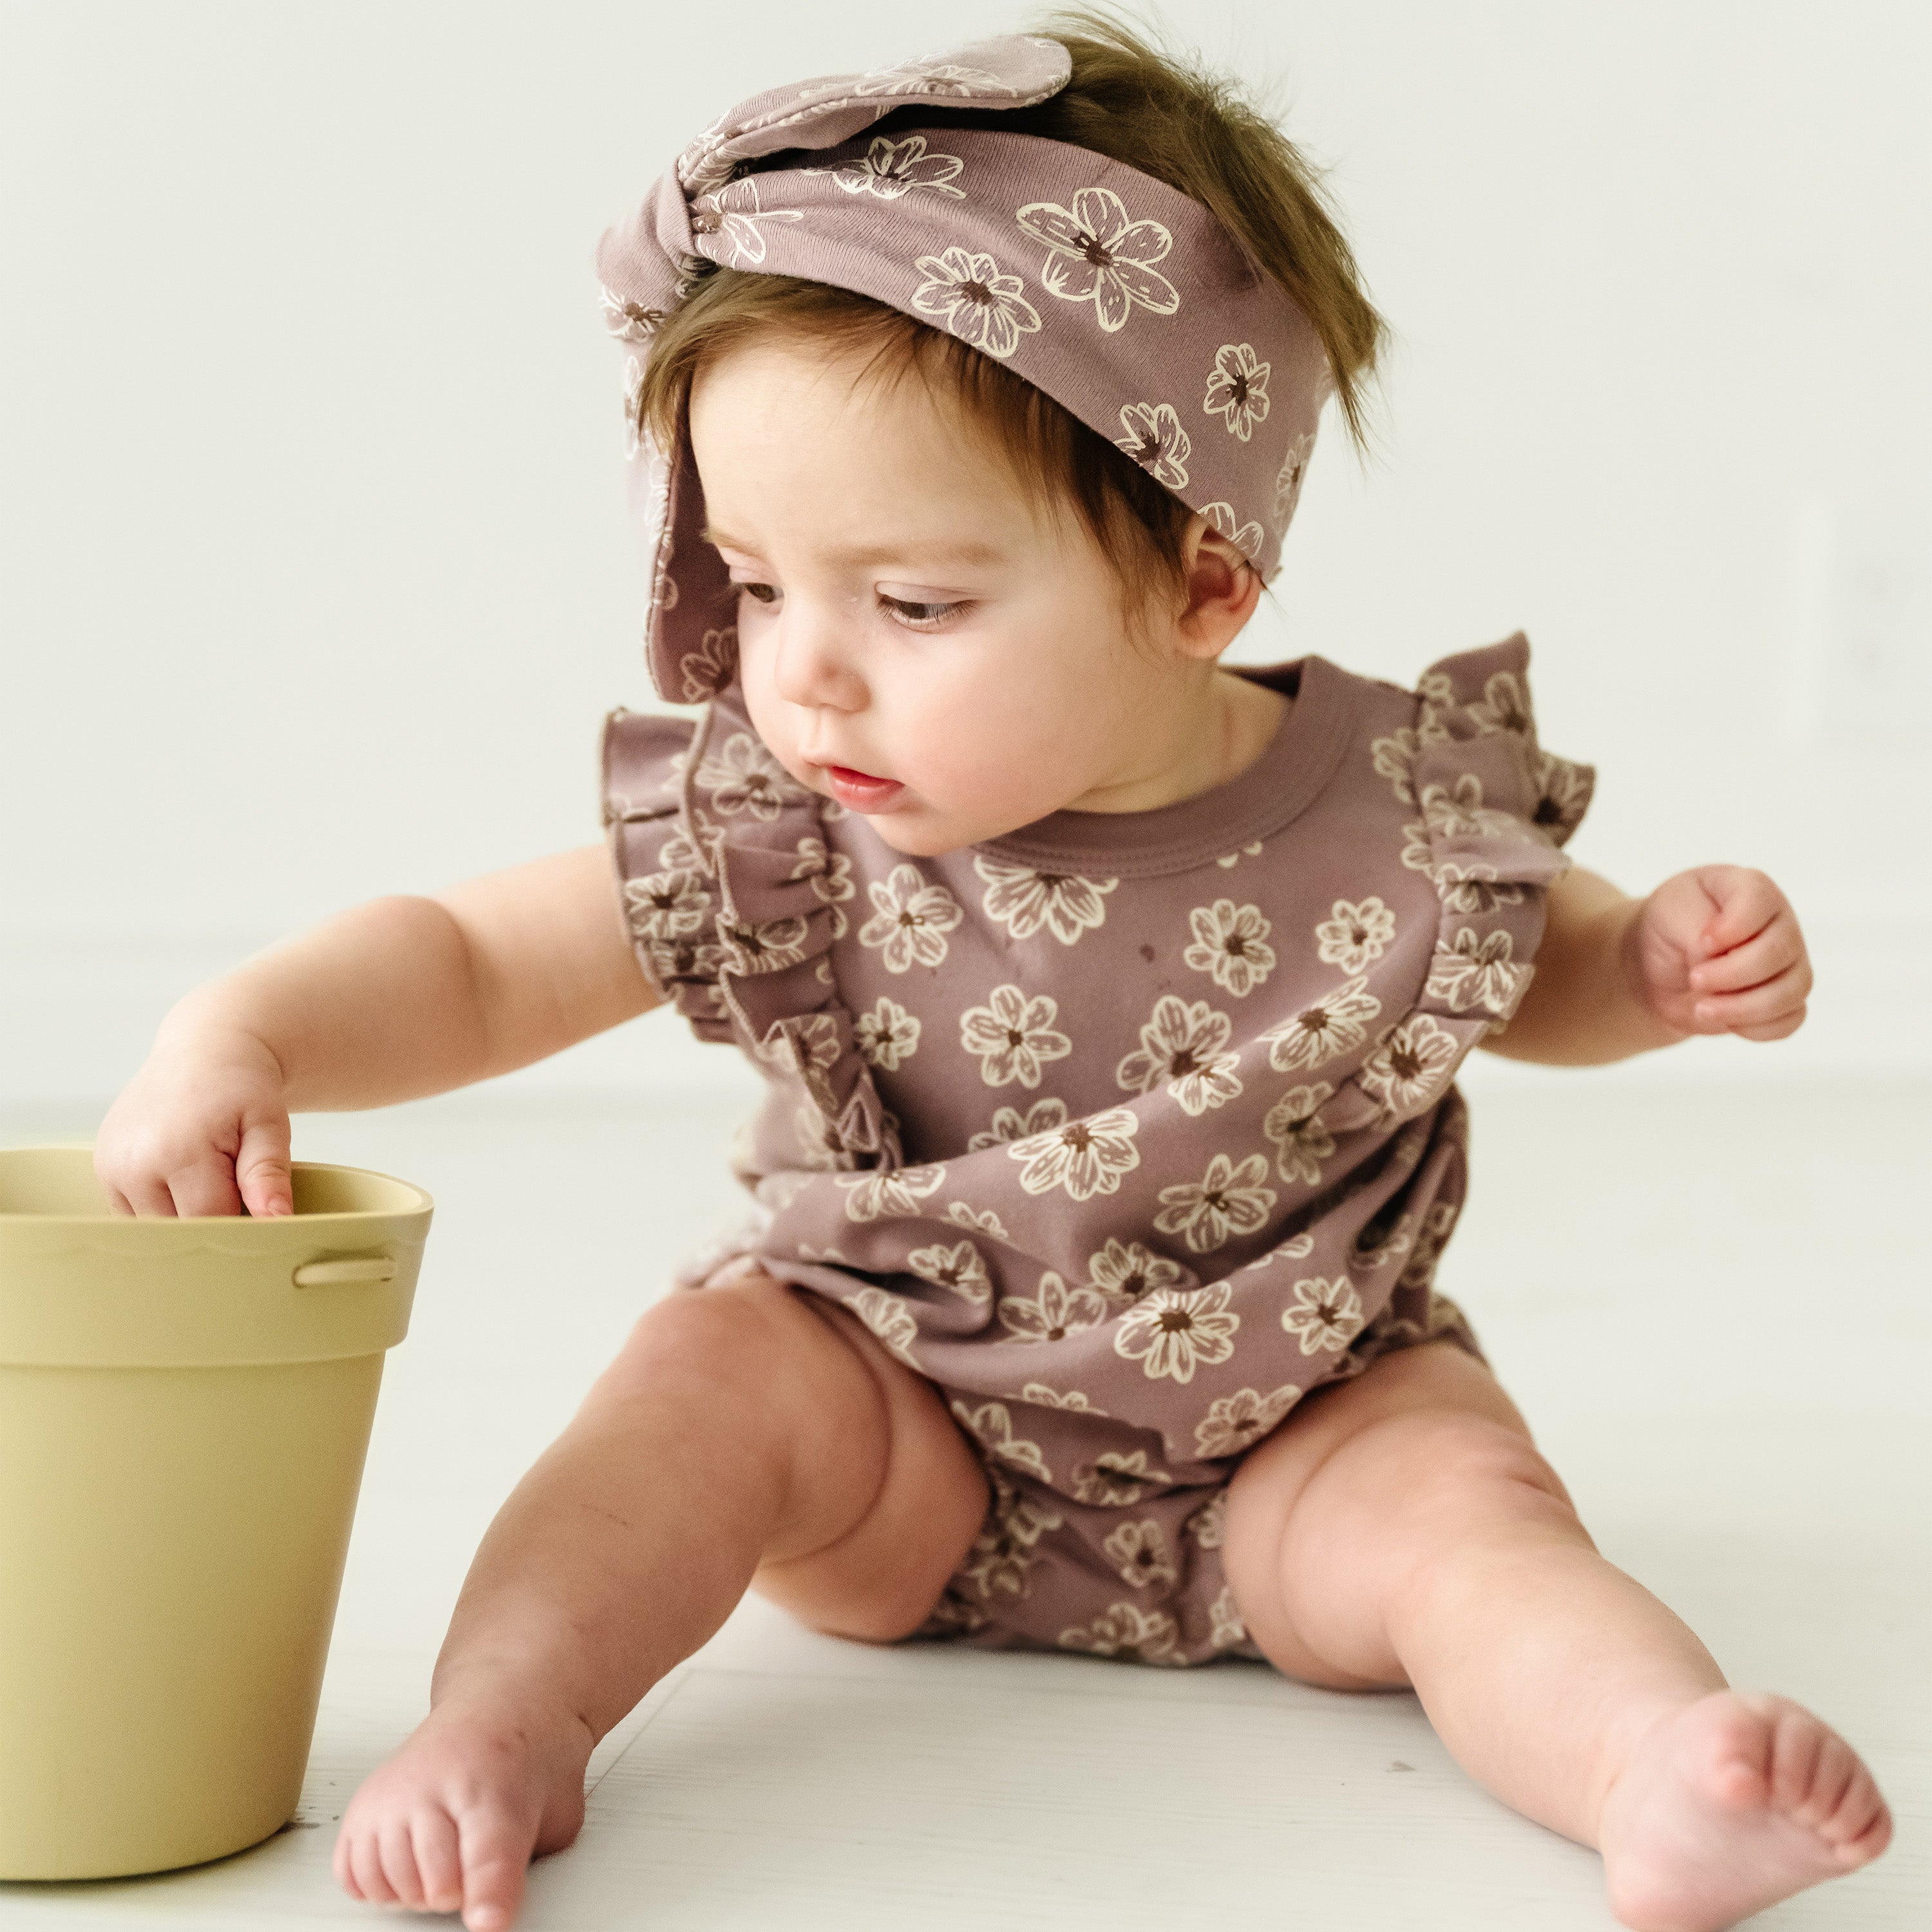 A toddler in a brown floral outfit and headband examines an Organic Flutter Bubble Onesie - Daisies container, sitting on a white surface with a curious expression.